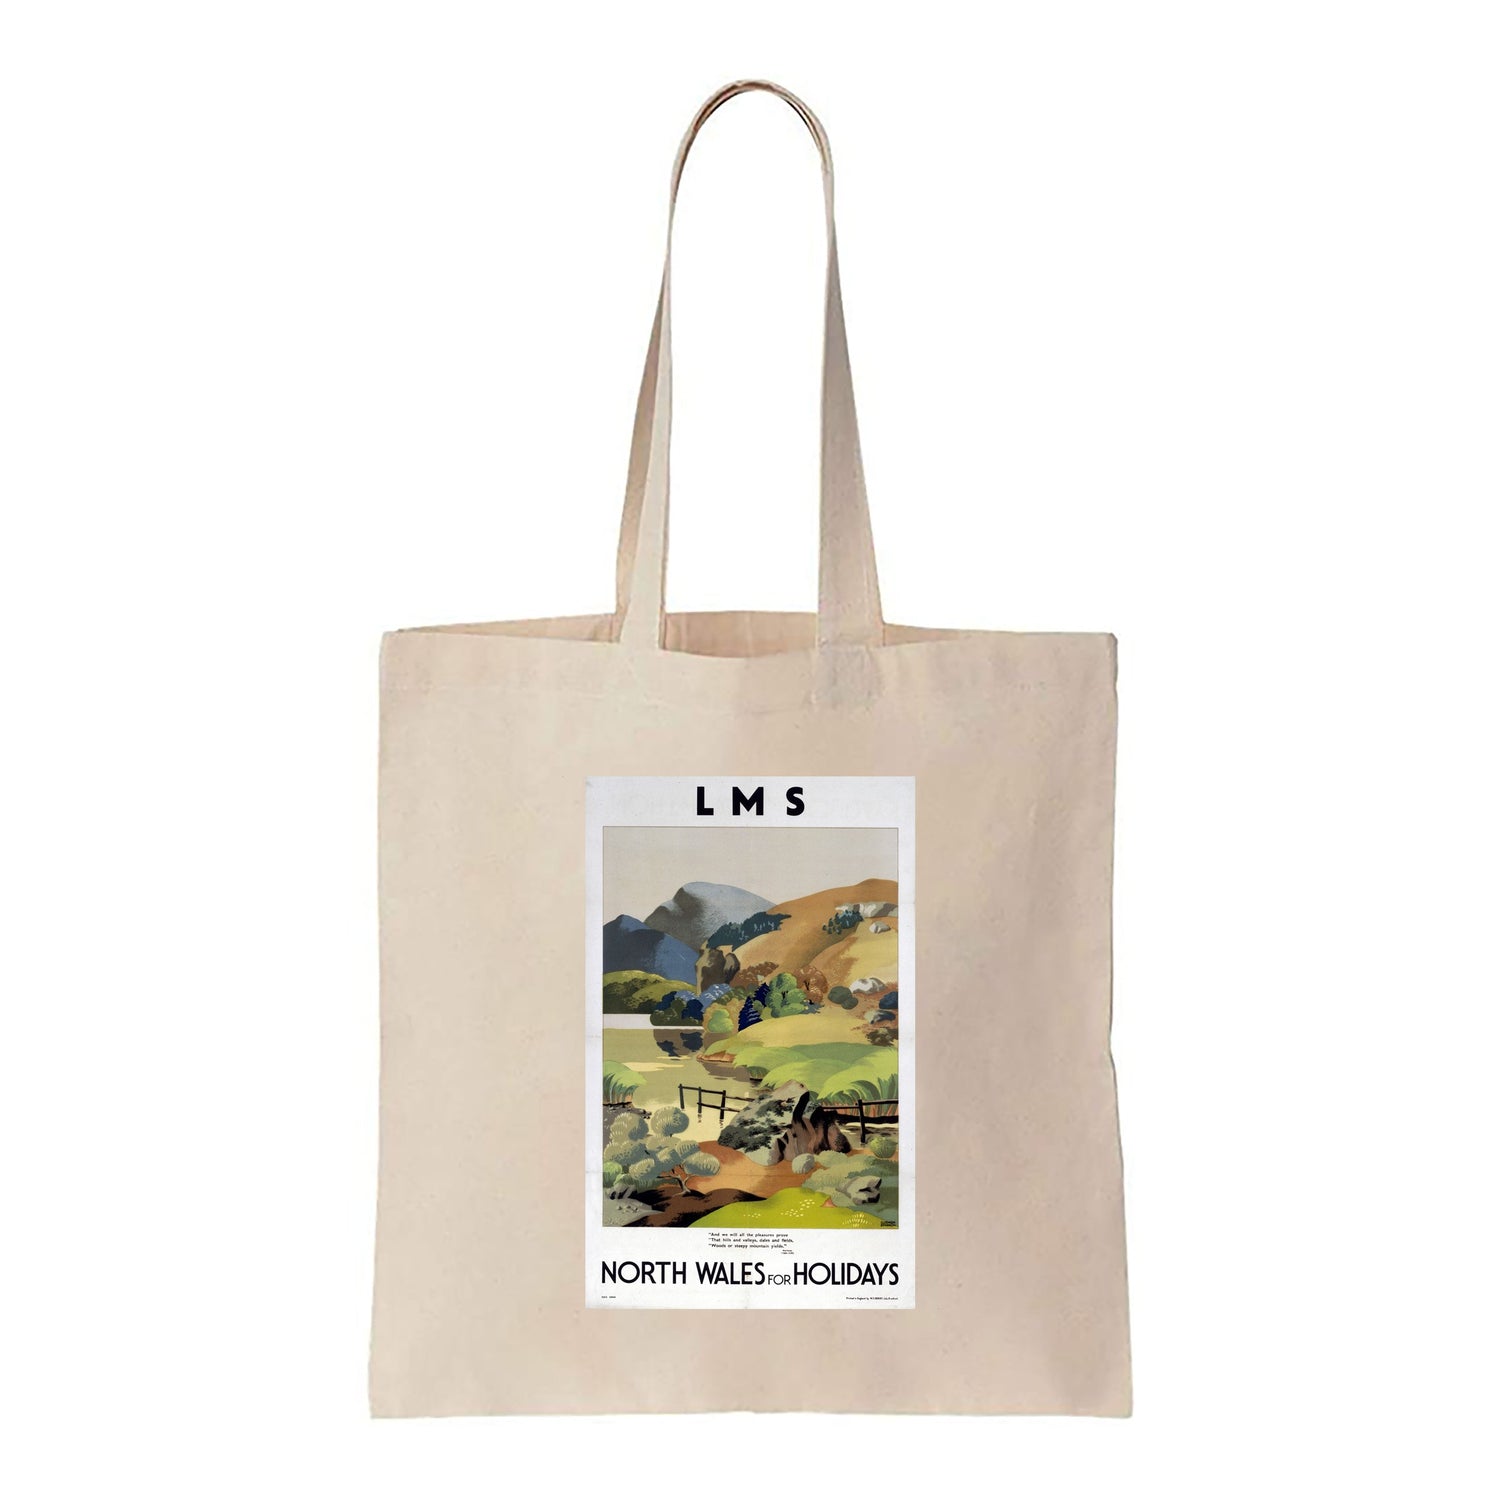 North Wales for Holidays - Canvas Tote Bag